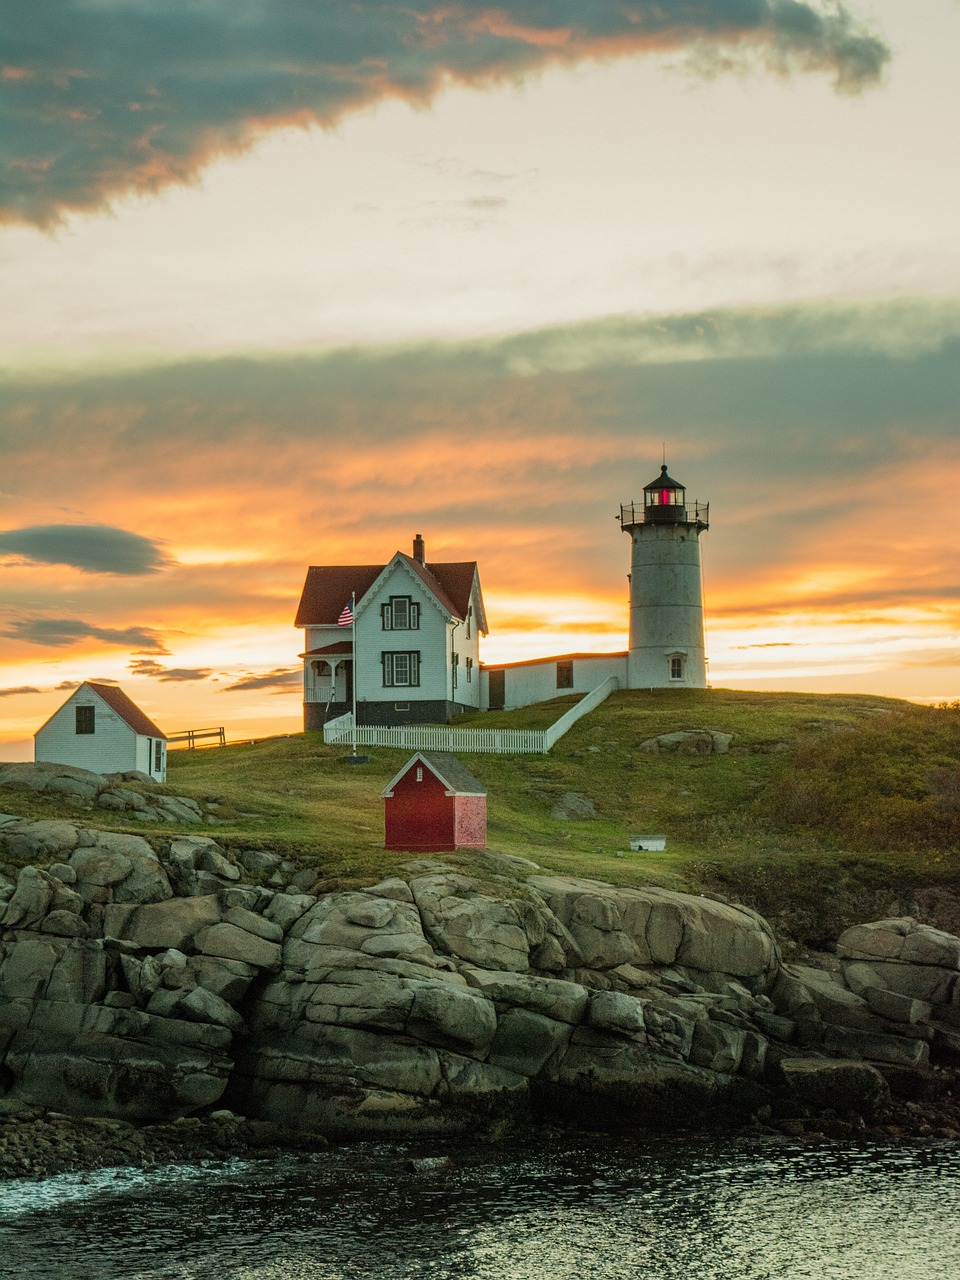 Nature and Culinary Delights in Maine